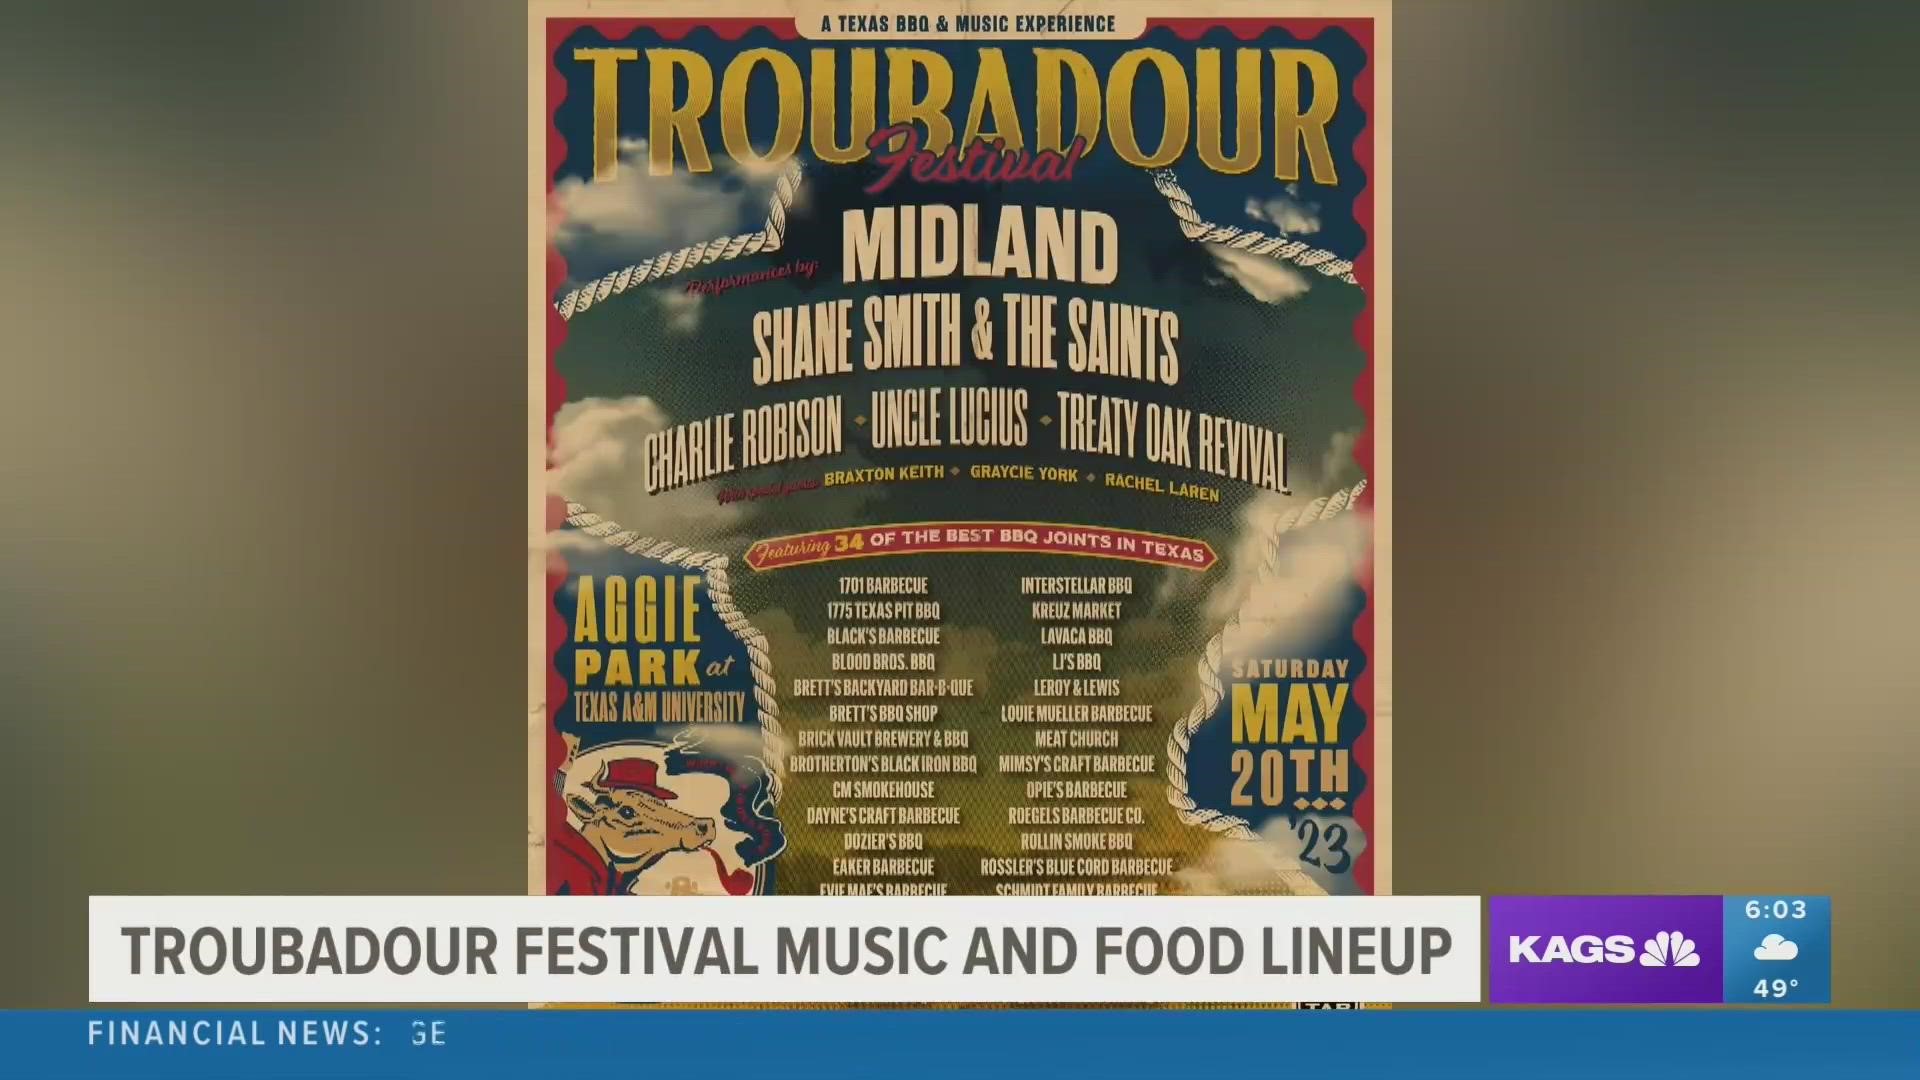 The festival take place on May 20 at Aggie Park and tickets go on sale on March 3.